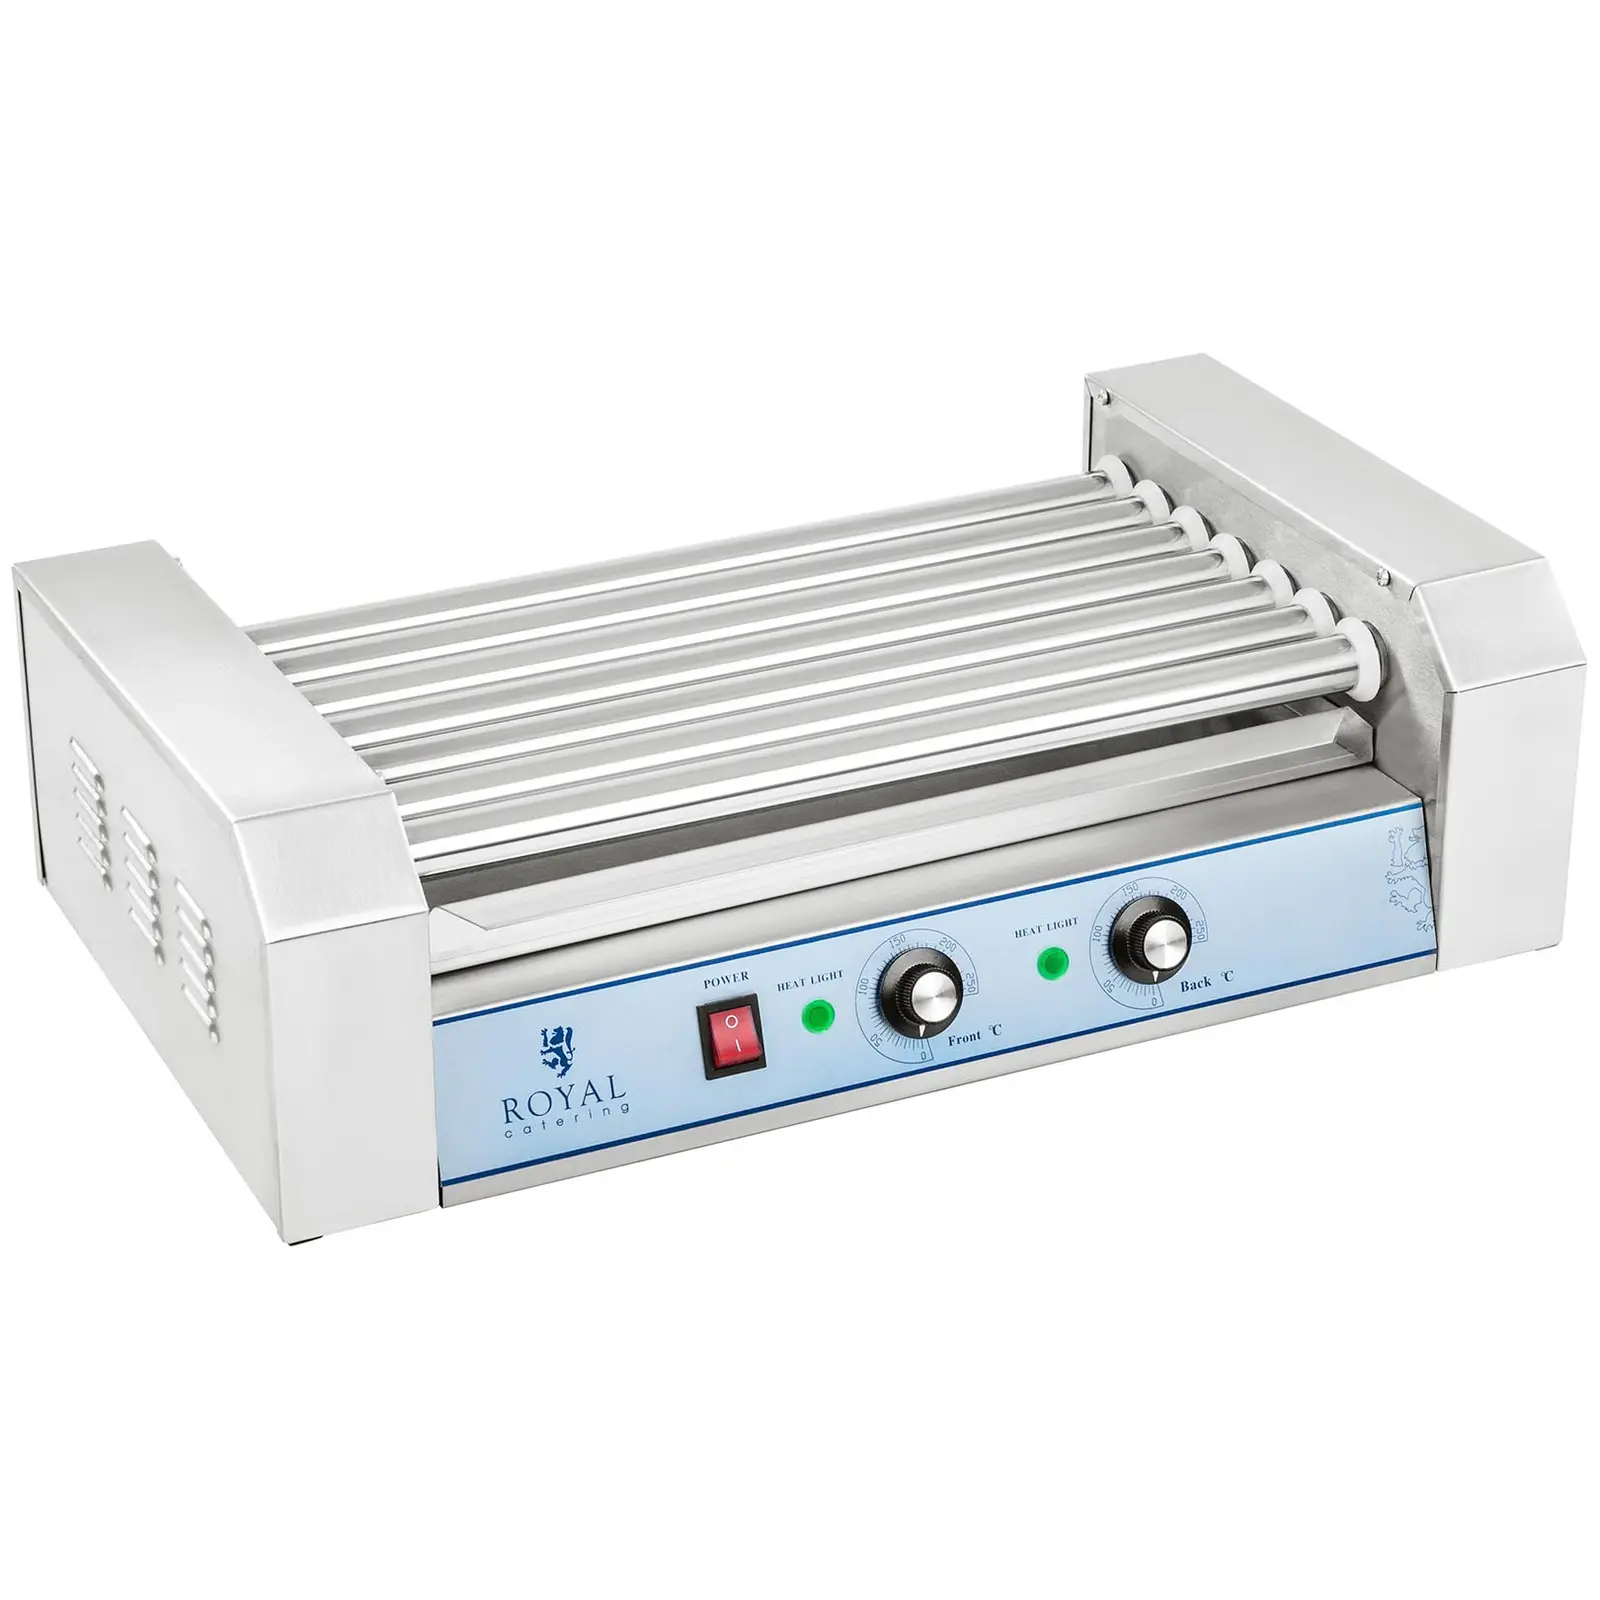 Hot Dog Grill - 7 rollers - stainless steel